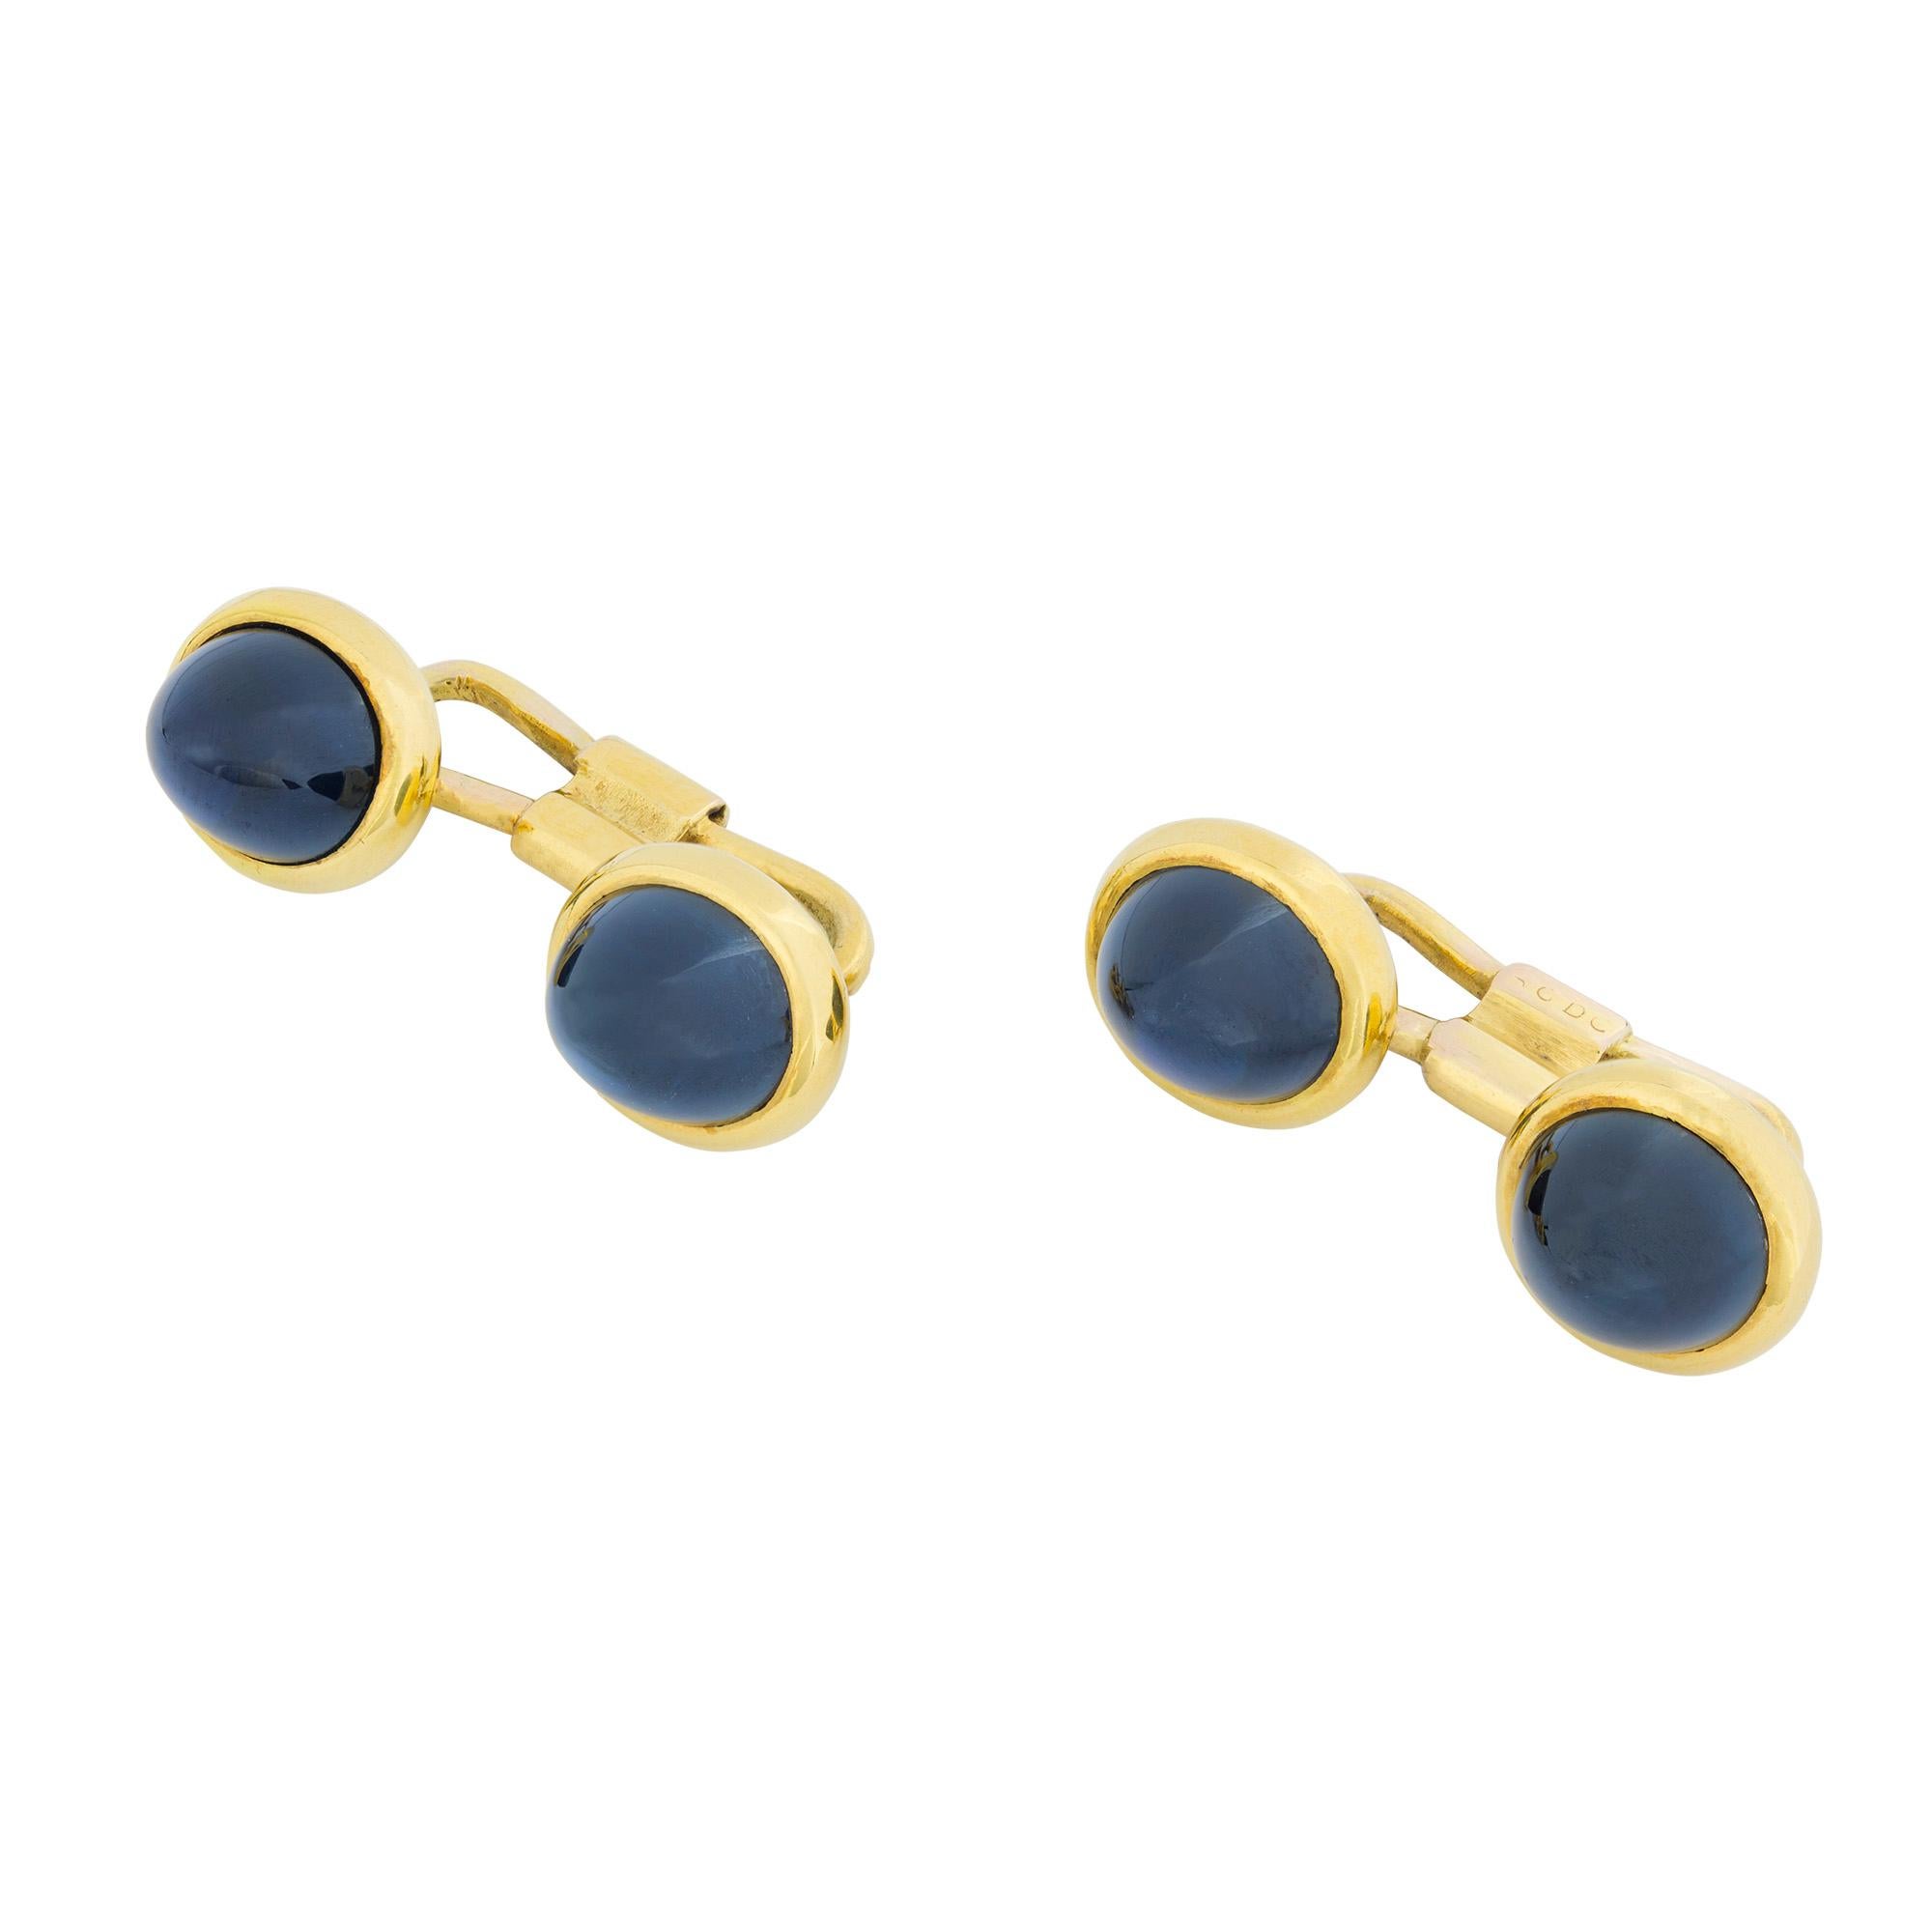 A pair of late Victorian sapphire and yellow gold cufflinks, each cufflink comprising two plaques, each set with a circular cabochon-cut sapphire, the four sapphires measuring approximately 8.4 x 7.4 mm, all set to yellow gold mounts with